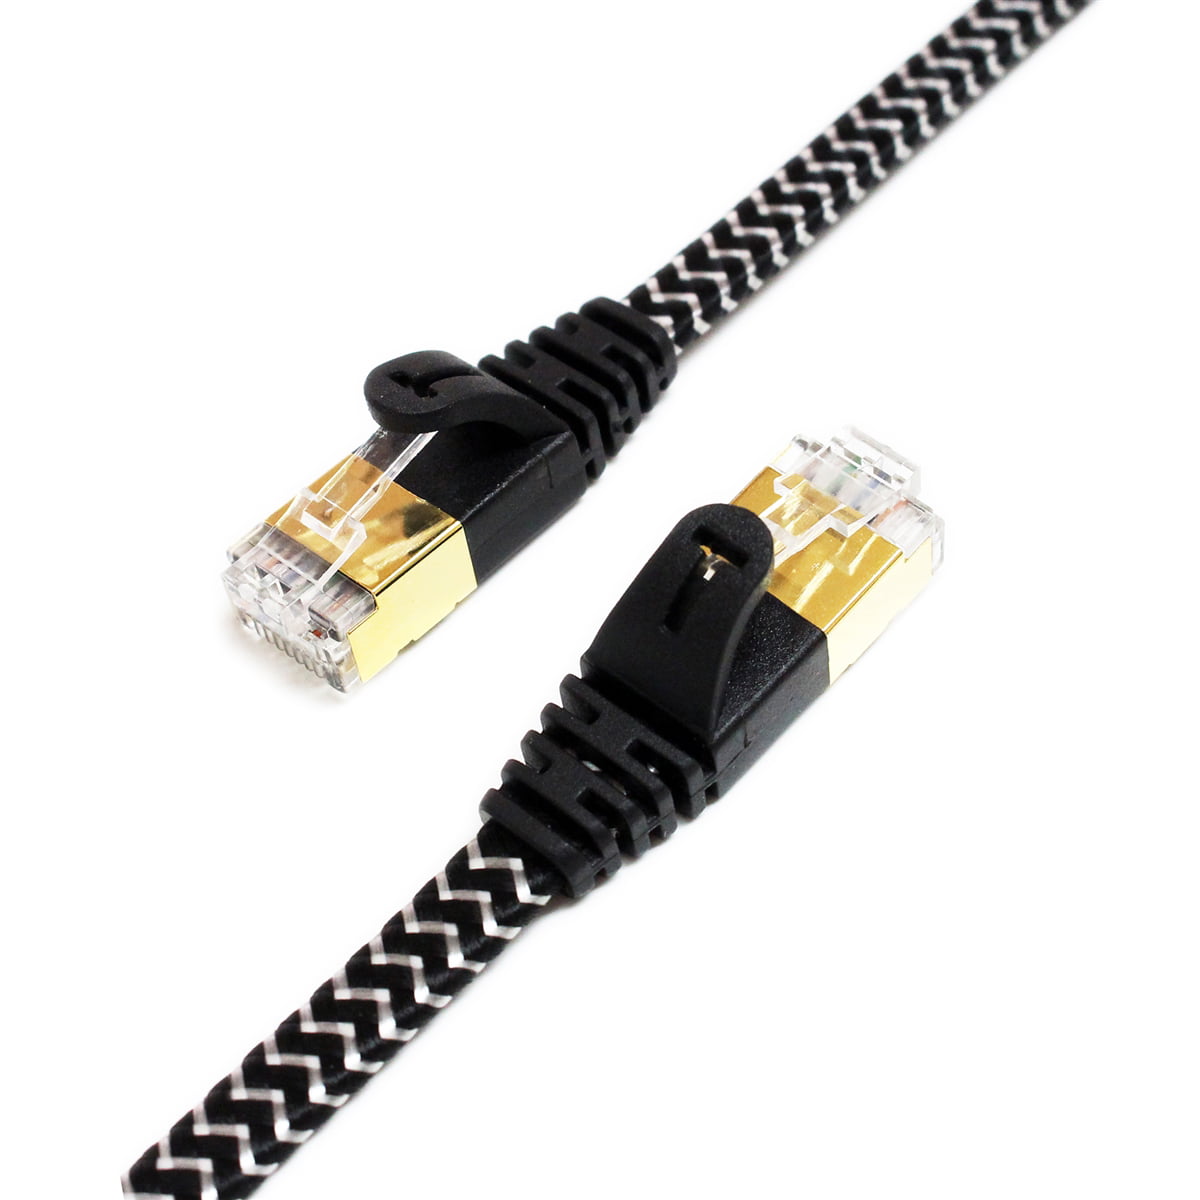 Extremely high speed CAT7 10 Gigabit Ethernet Ultra Flat Patch Cable 25-100FT